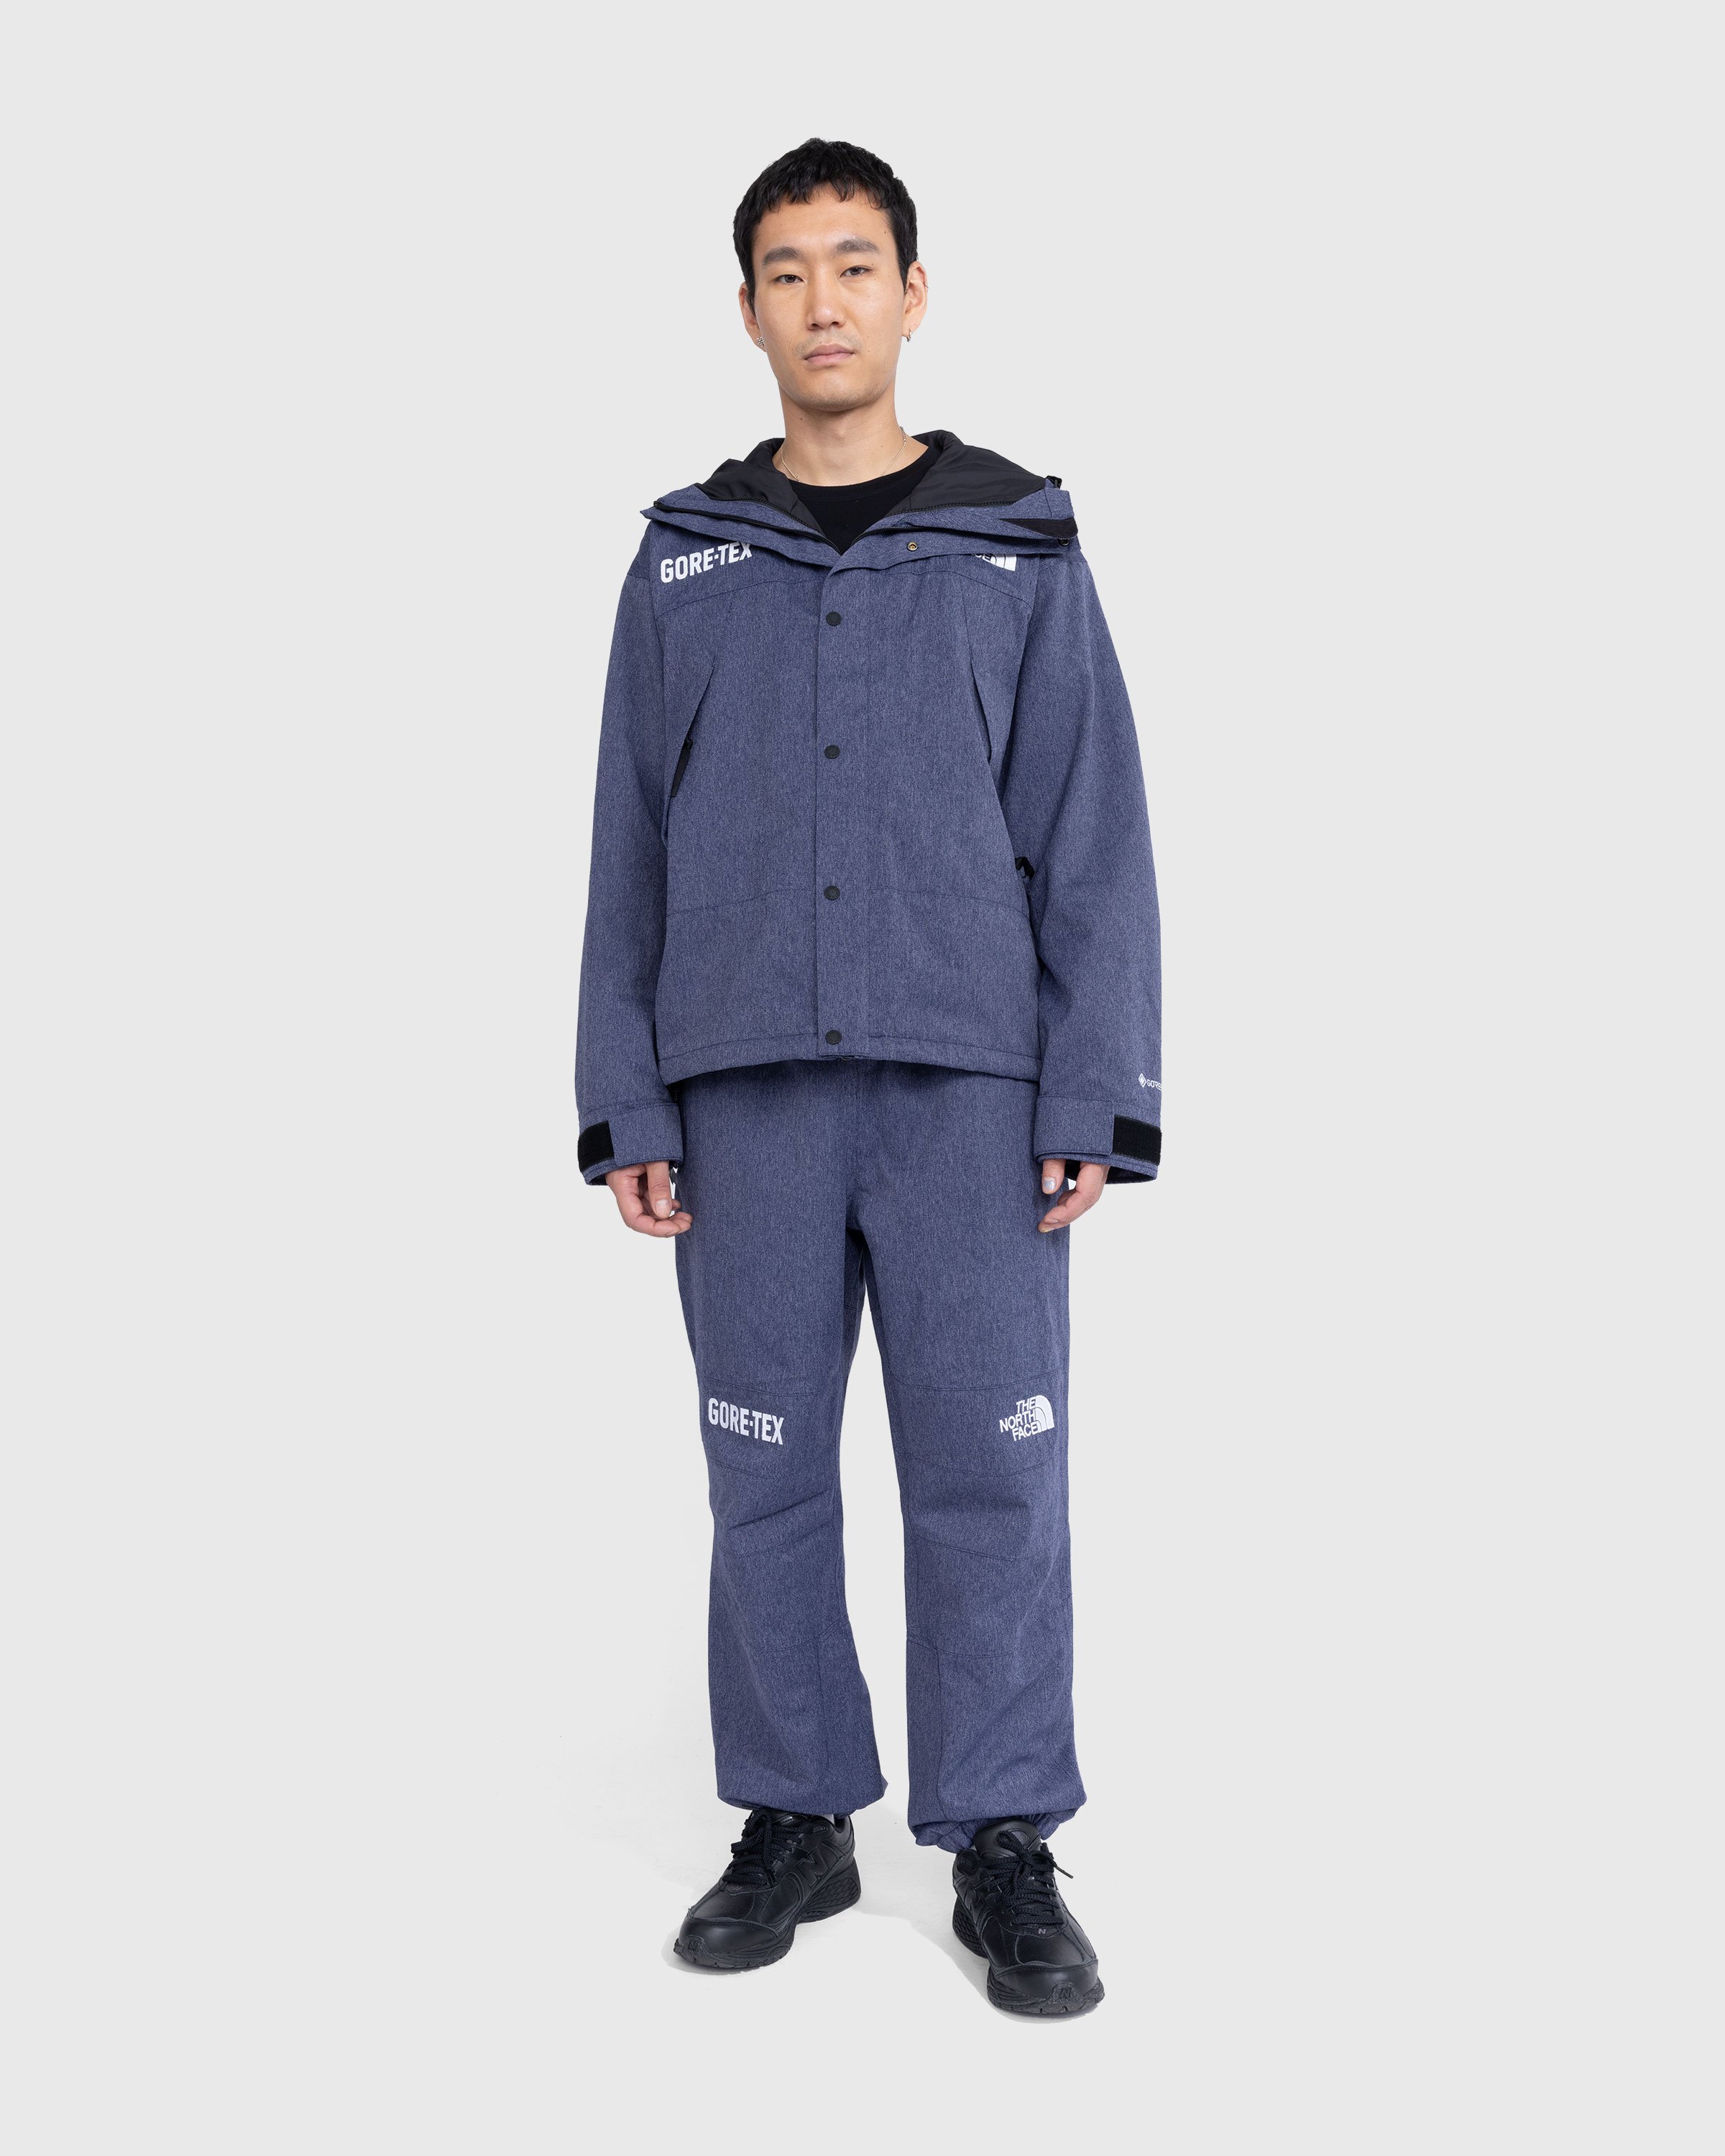 The North Face - GORE-TEX Mountain Jacket Denim Blue/TNF Black - Clothing - Blue - Image 2